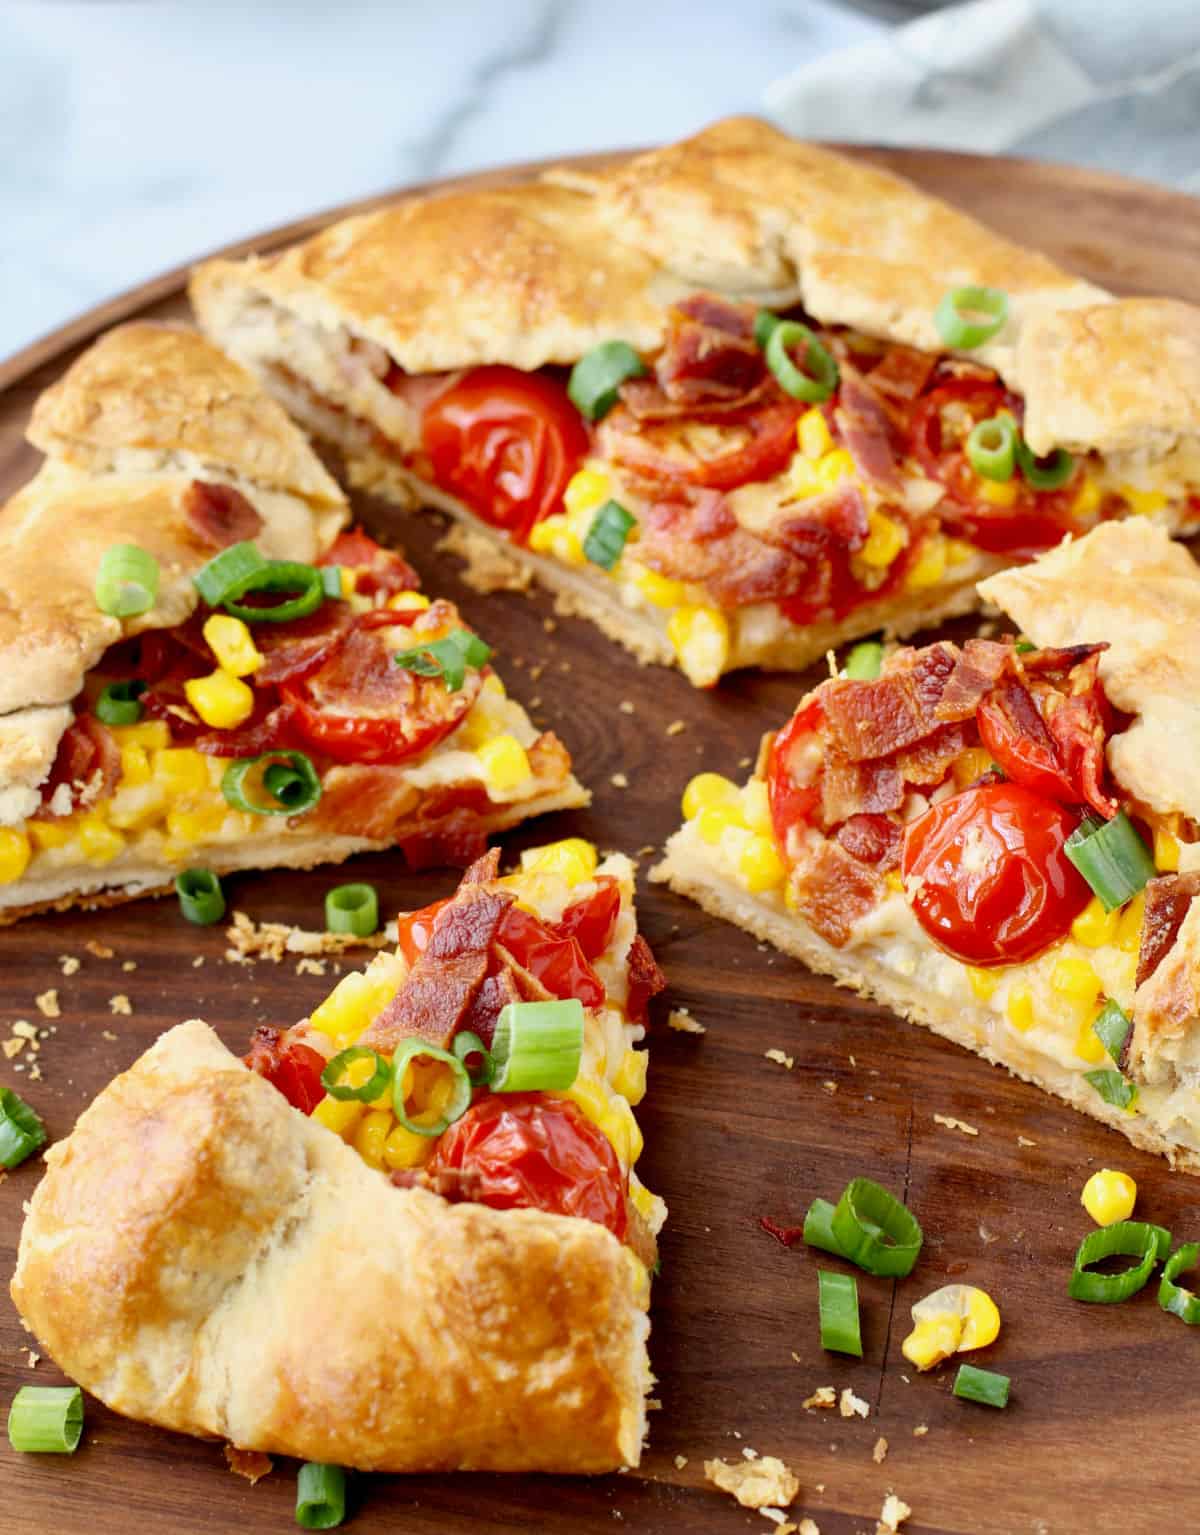 Bacon, Tomato, and Corn Galette with flaky crust crumbs on the cutting board.